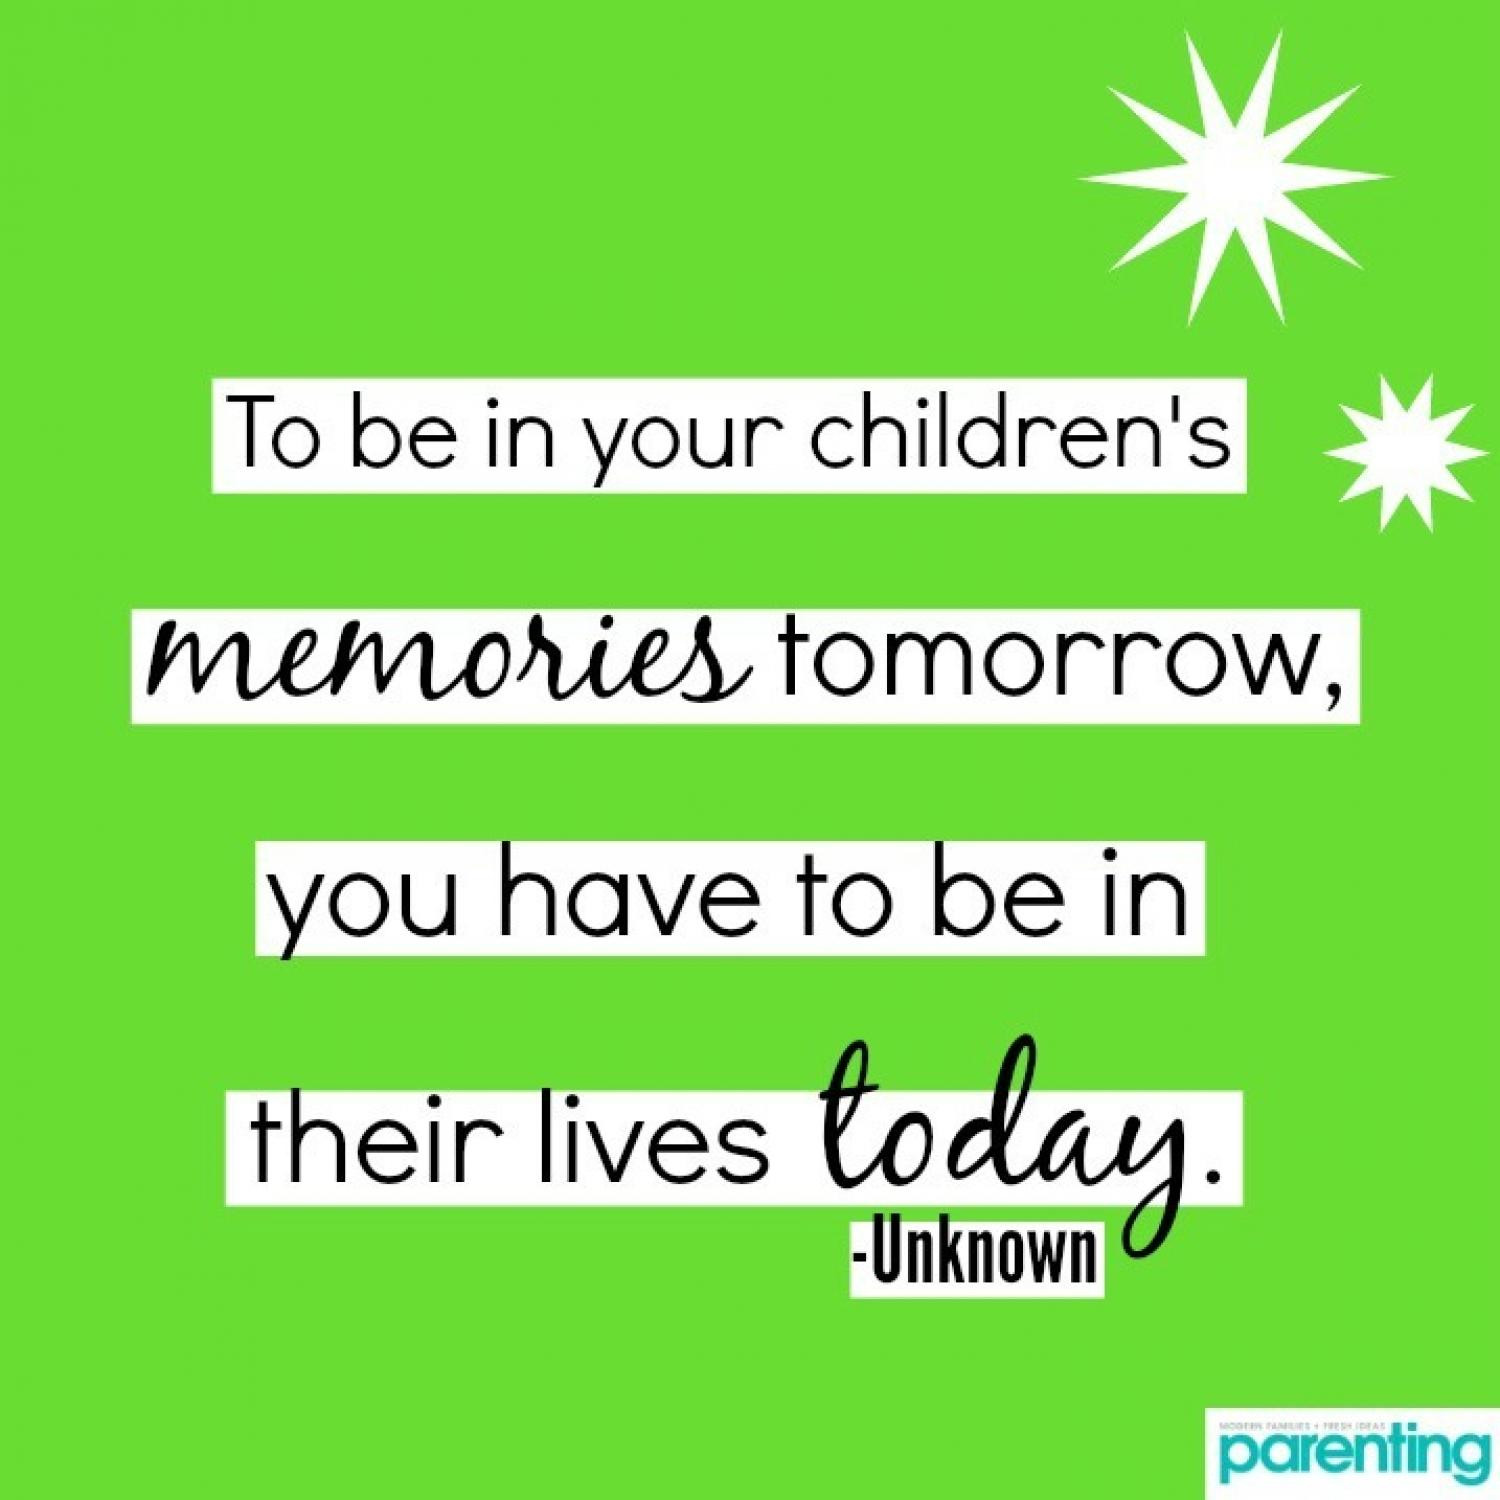 Quotes From Parents To Children
 17 Amazing Parenting Quotes That Will Make You a Better